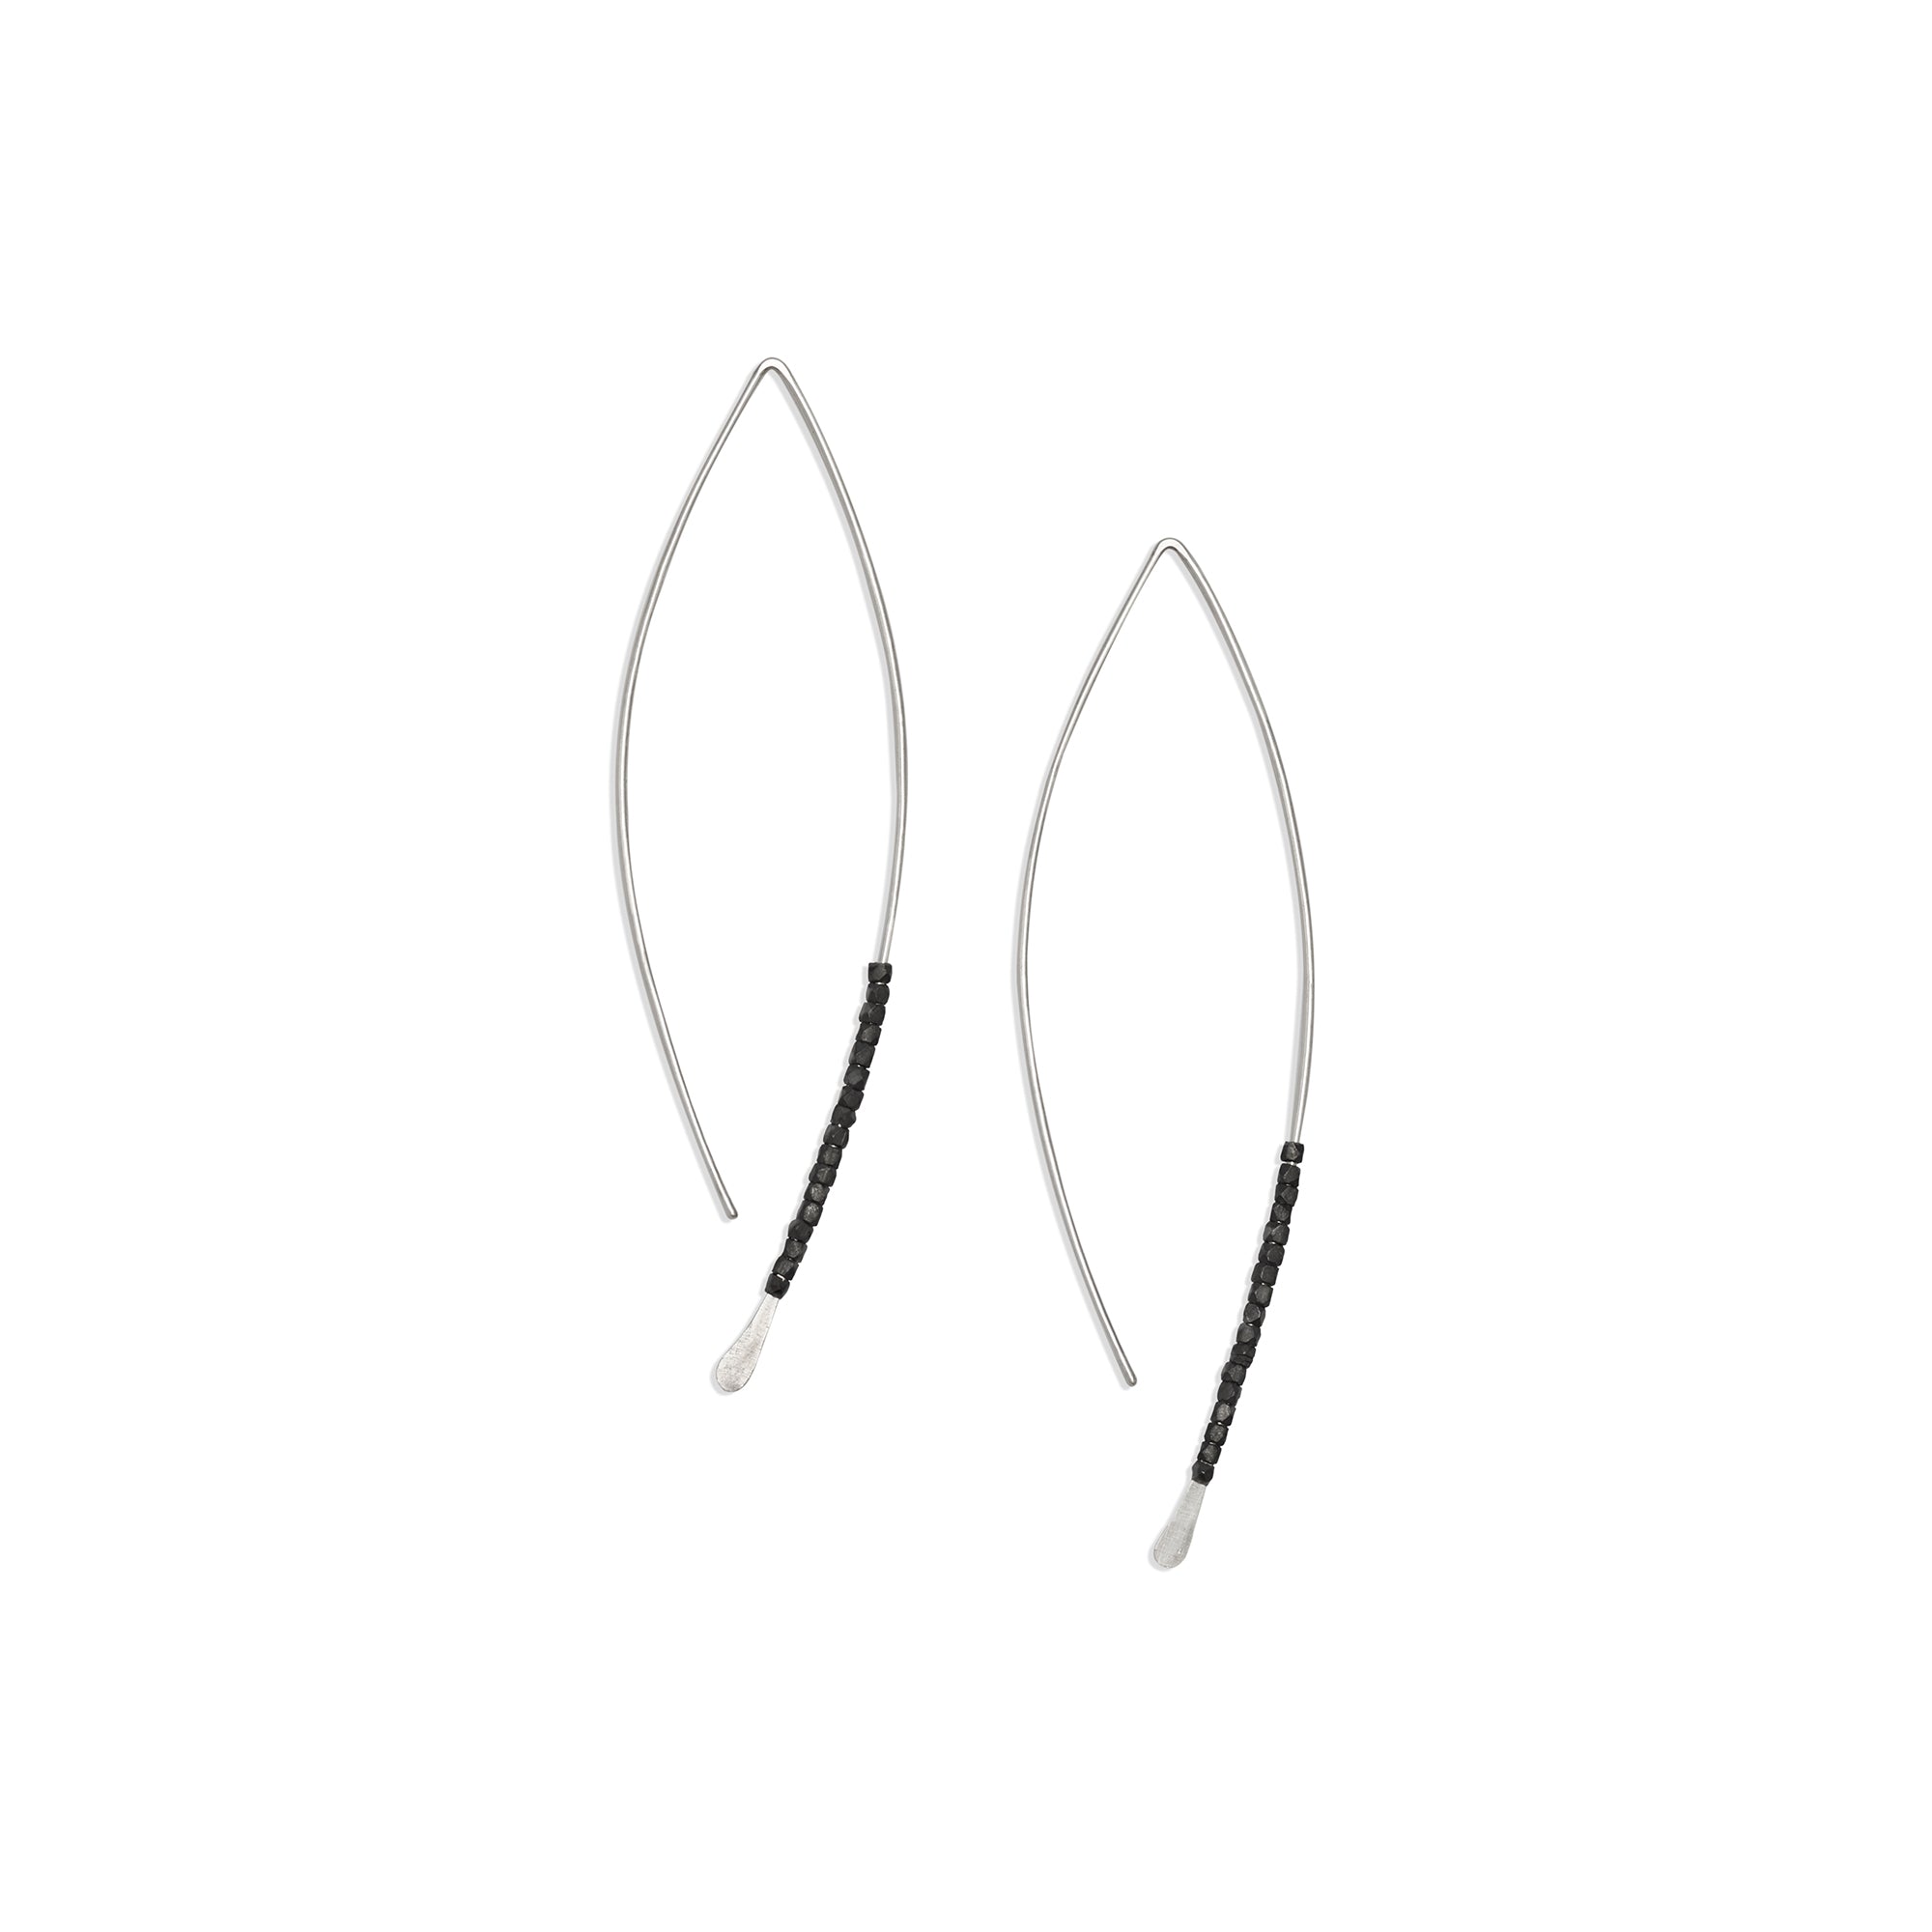 The Bead Crescent Earrings feature a thin, hammered wire adorned with oxidized sterling silver beads 